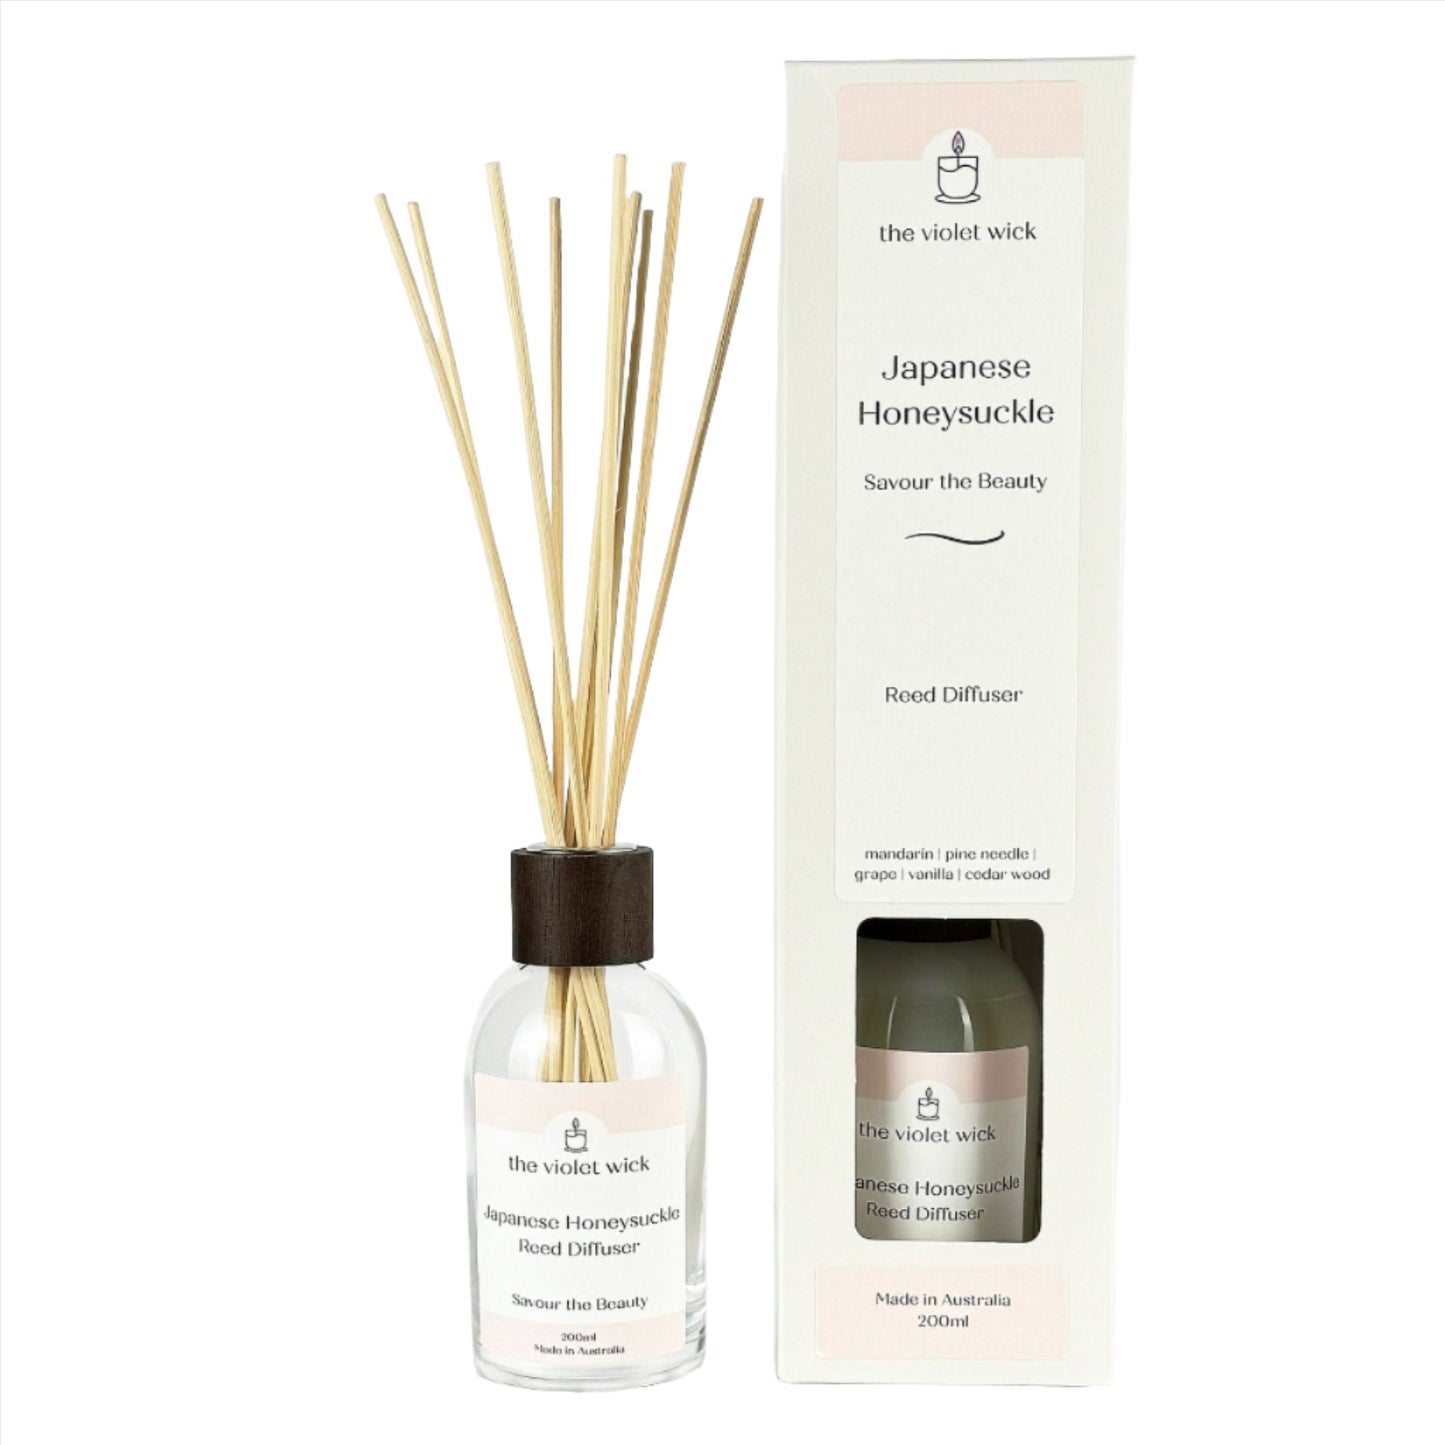 Japanese Honeysuckle Reed Diffuser from The Violet Wick